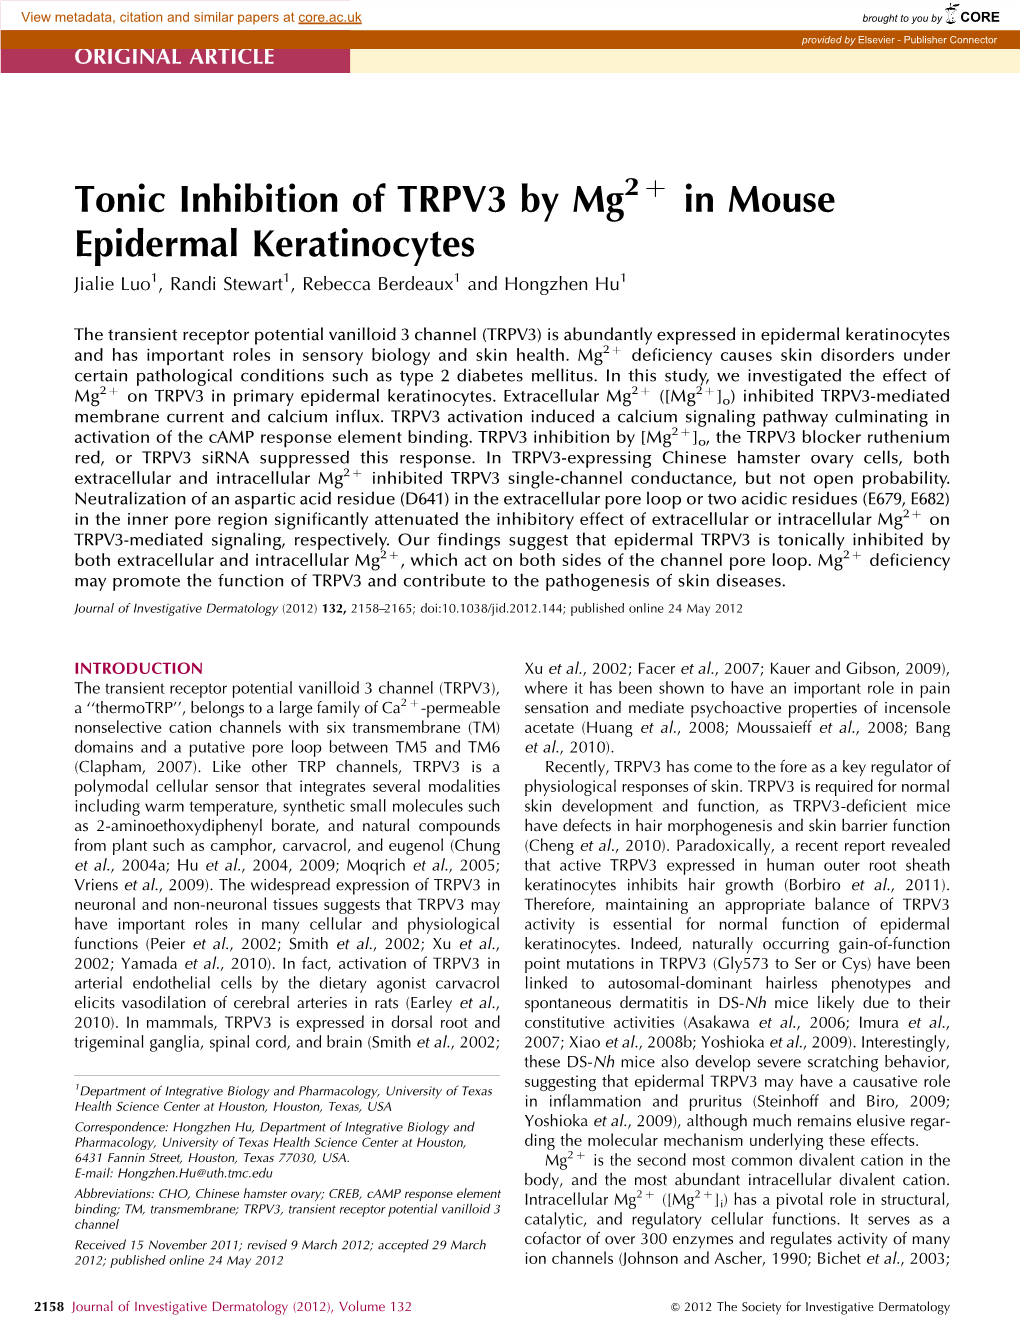 Tonic Inhibition of TRPV3 by Mg2+ in Mouse Epidermal Keratinocytes